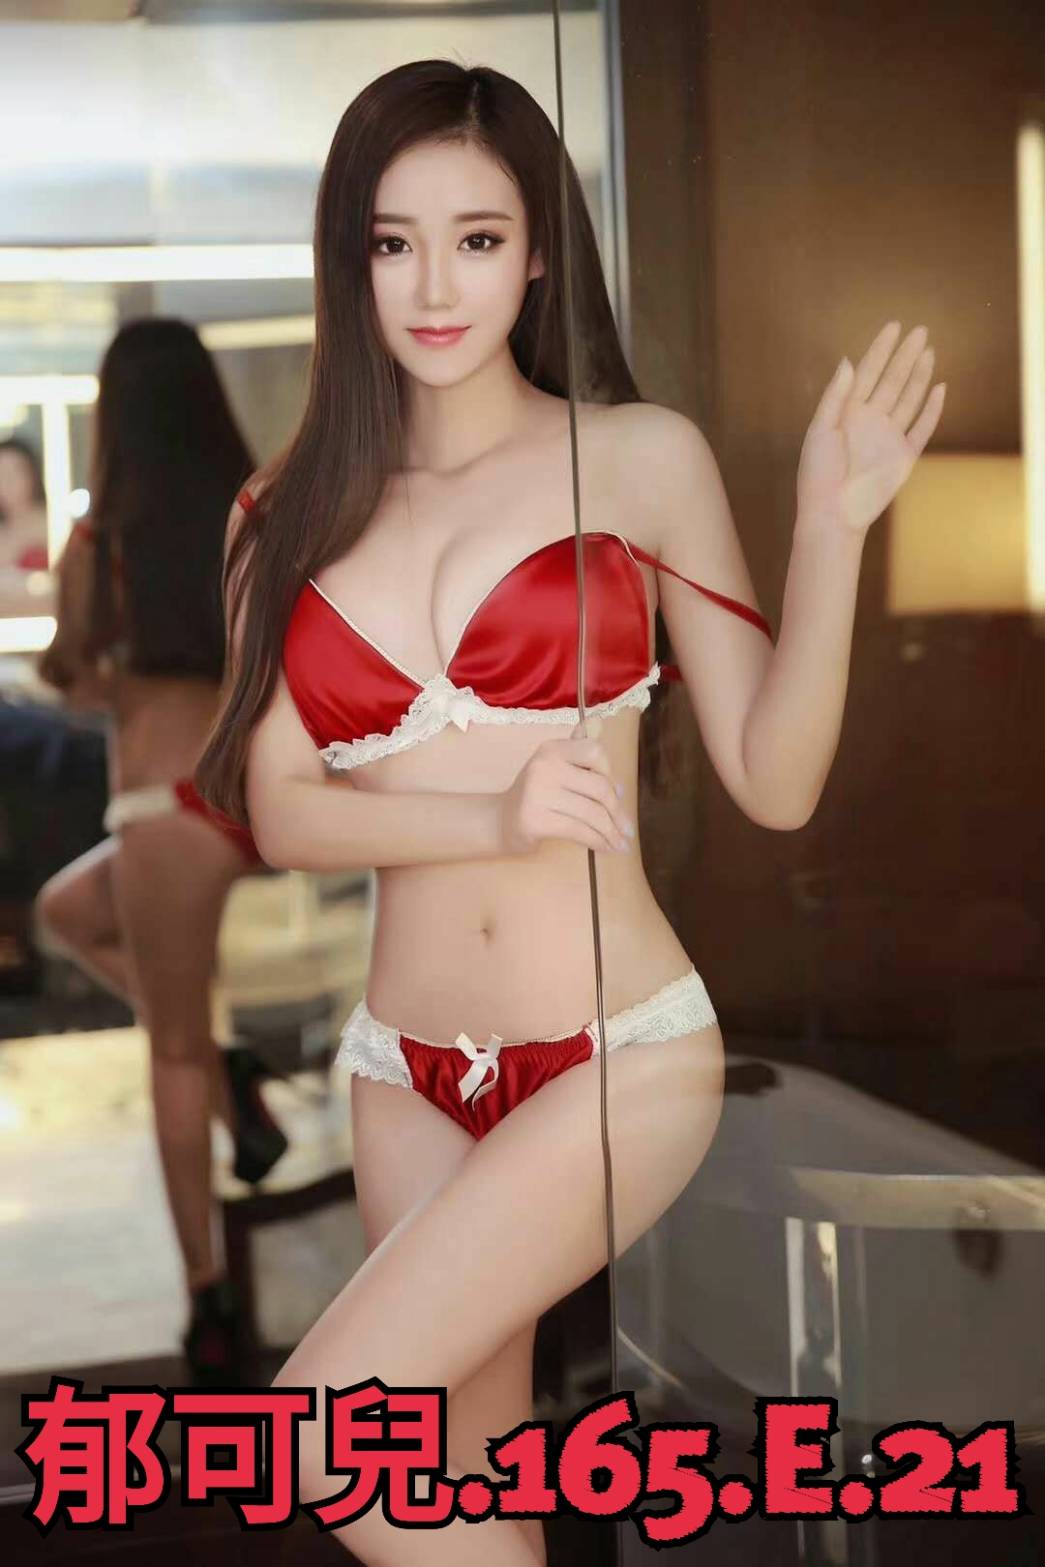 Sex younger girls in Taipei